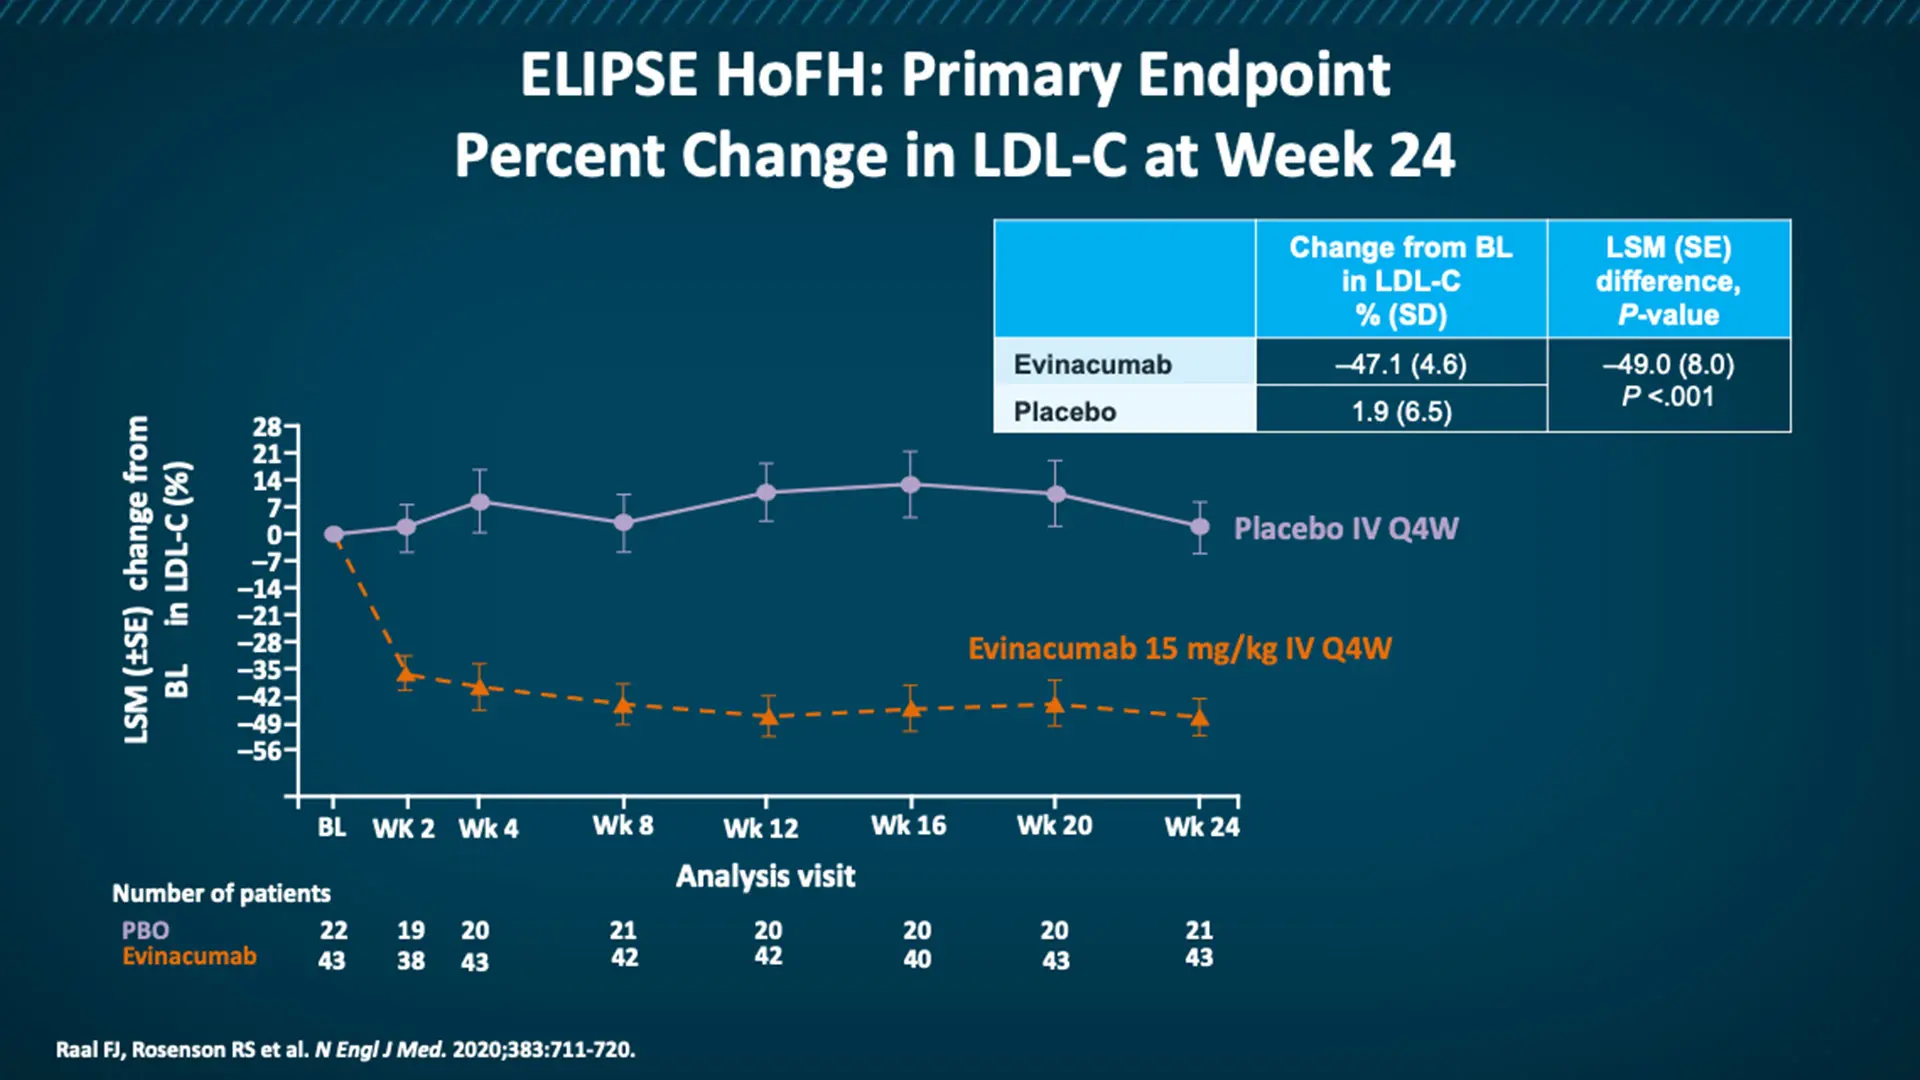 At week 24, patients in the group that received the monoclonal antibody evinacumab had a relative reduction from baseline in the LDL cholesterol level of 47.1 percent, compared with an increase of 1.9 percent in the placebo group.